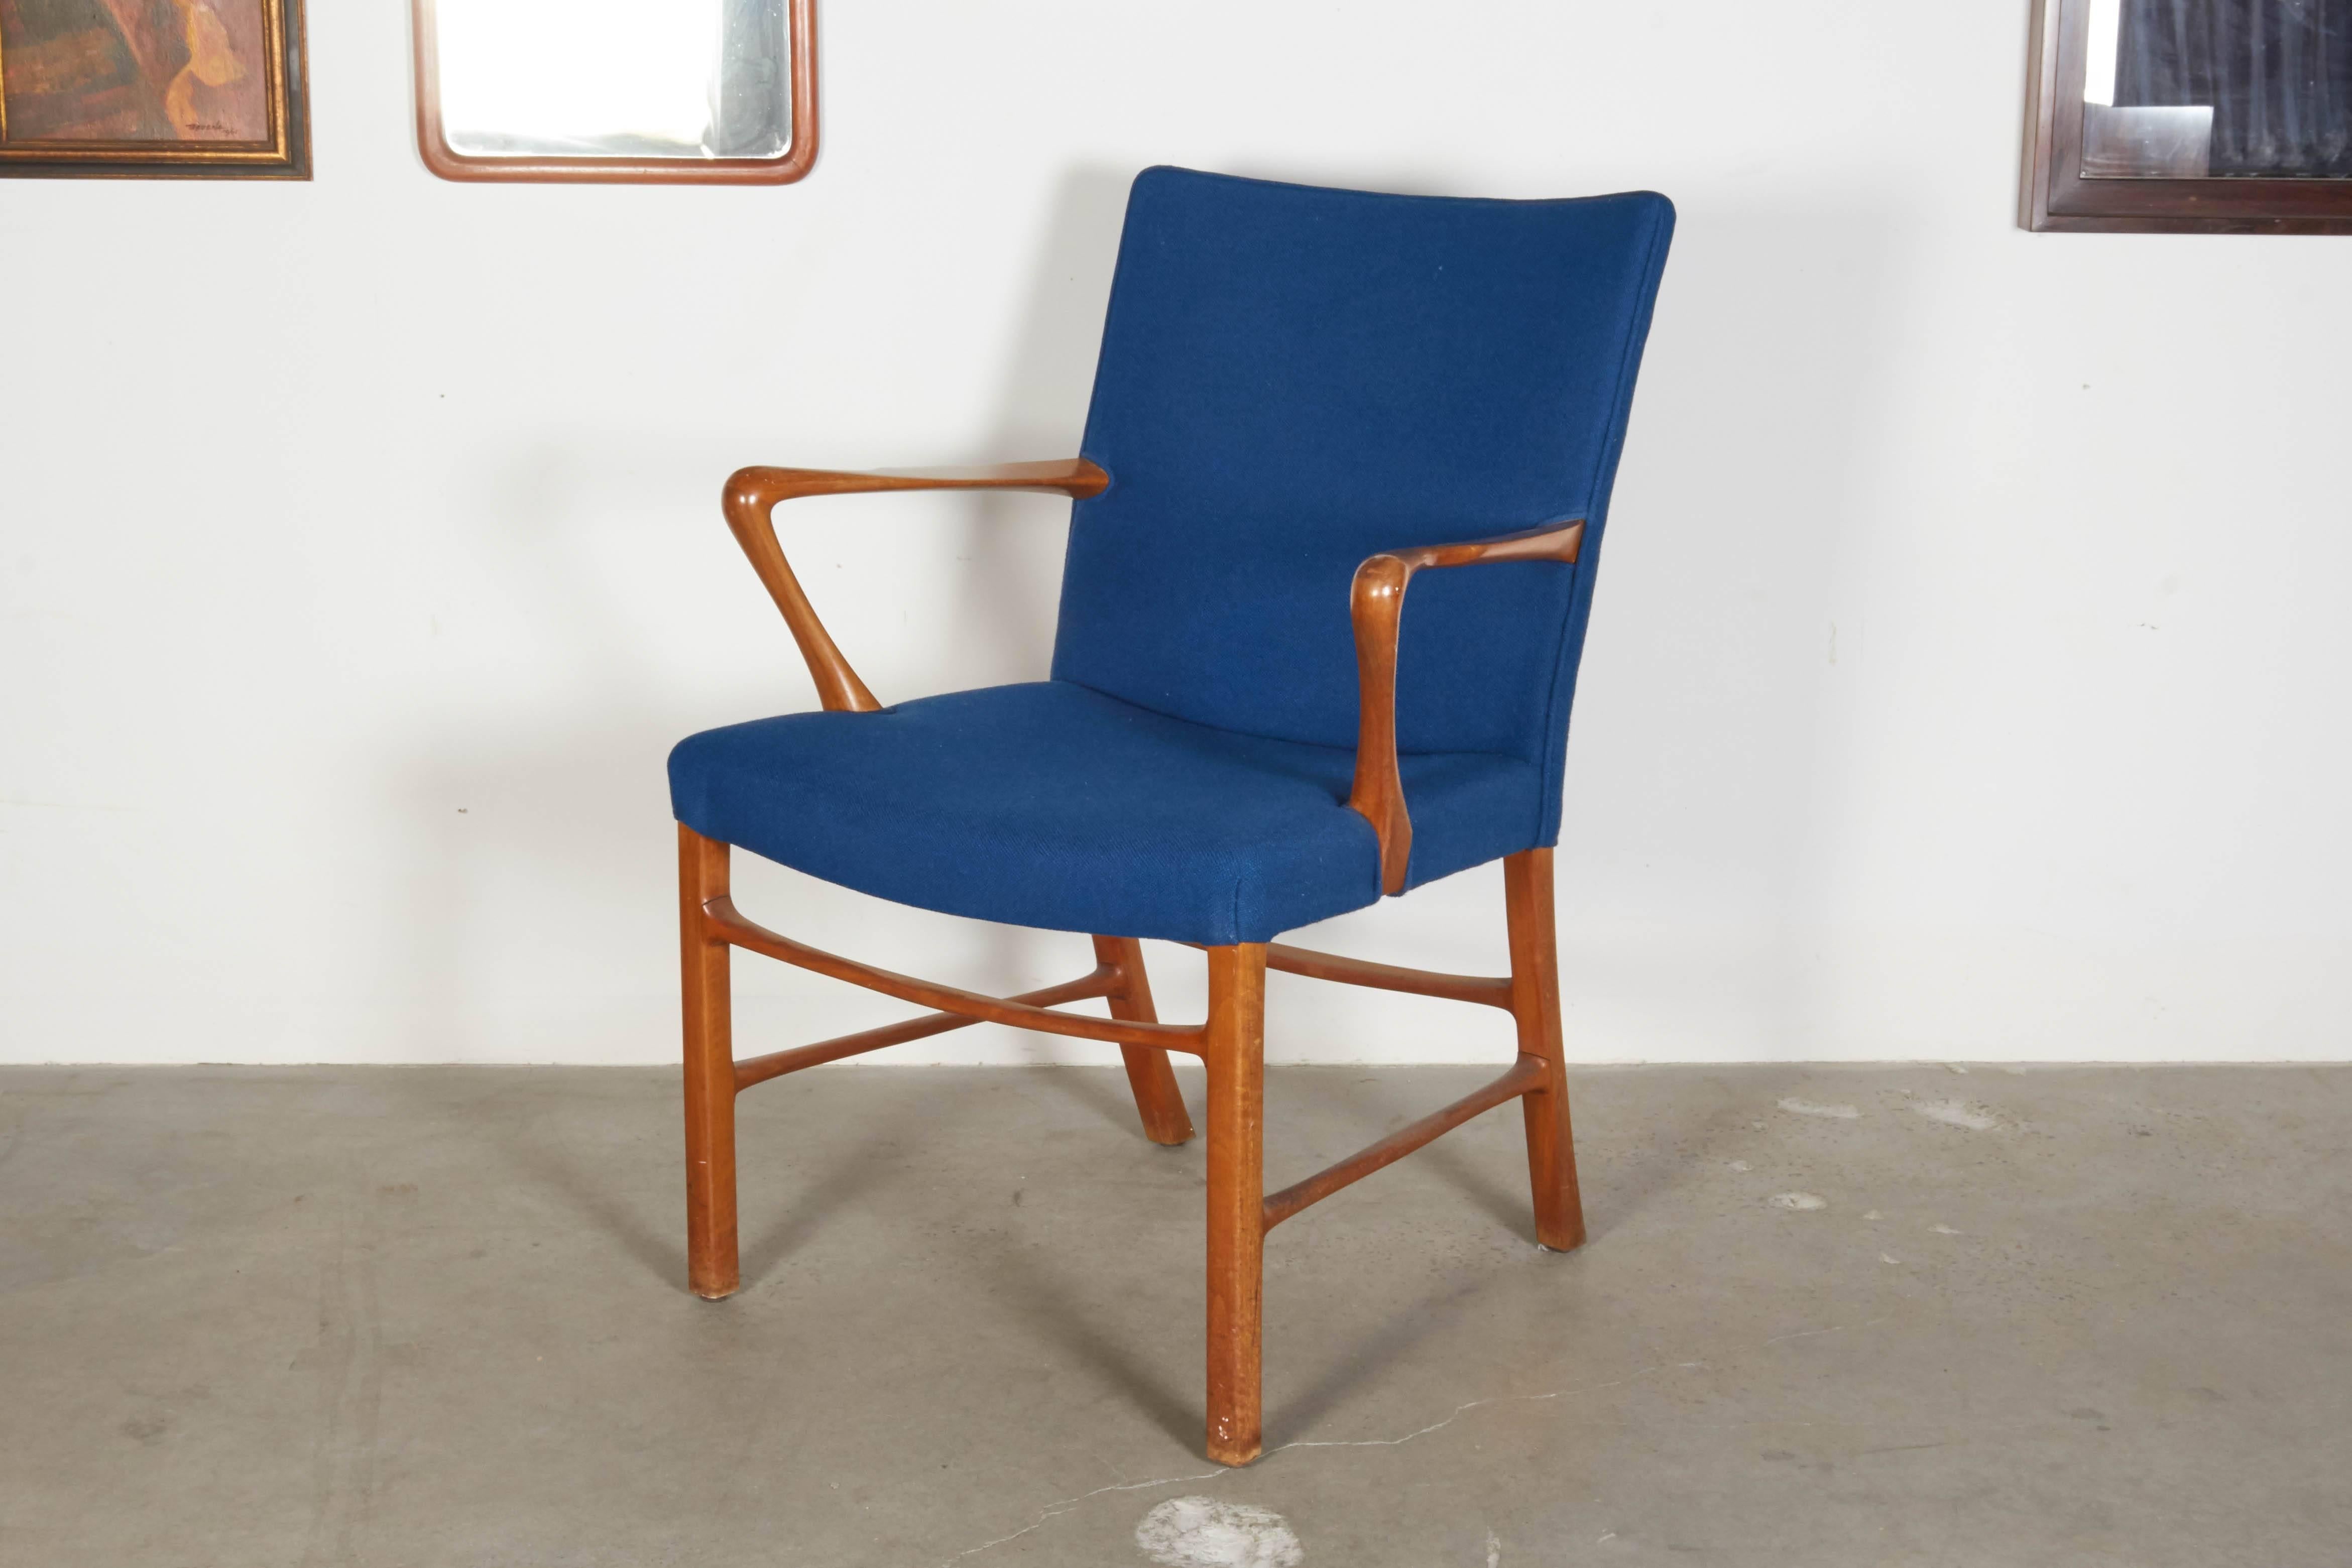 Vintage 1950s Danish Modern occasional armchairs.

These Mid-Century armchairs are in excellent condition. Love the organic style of the cross bars and arms. Blue wool fabric is in great condition. We can also reupholster for you for a fee.